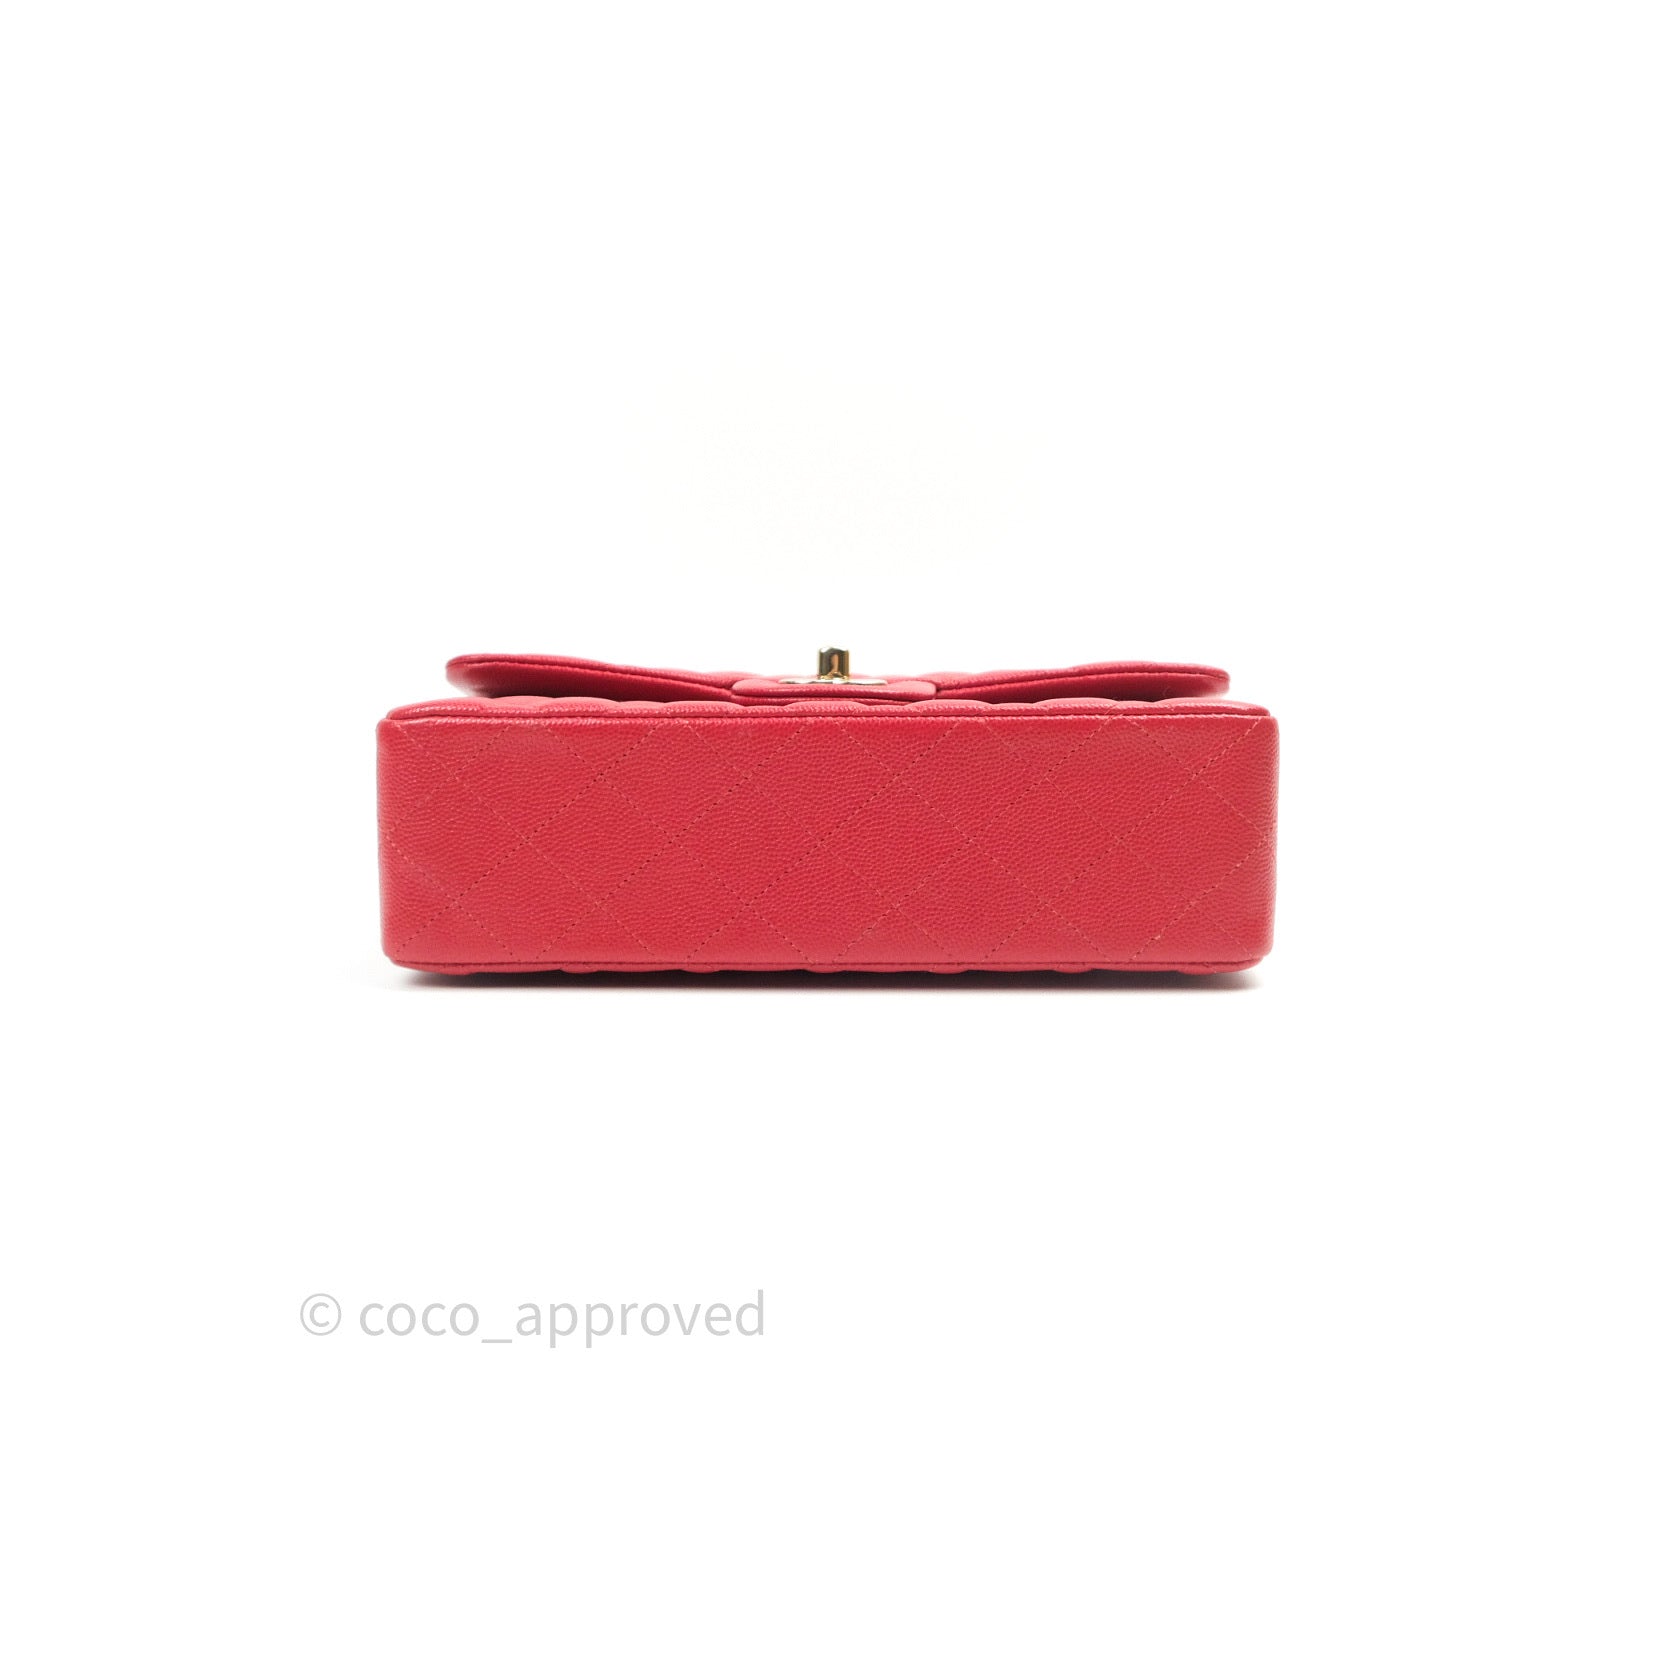 Small Classic Flap Wallet Red Leather